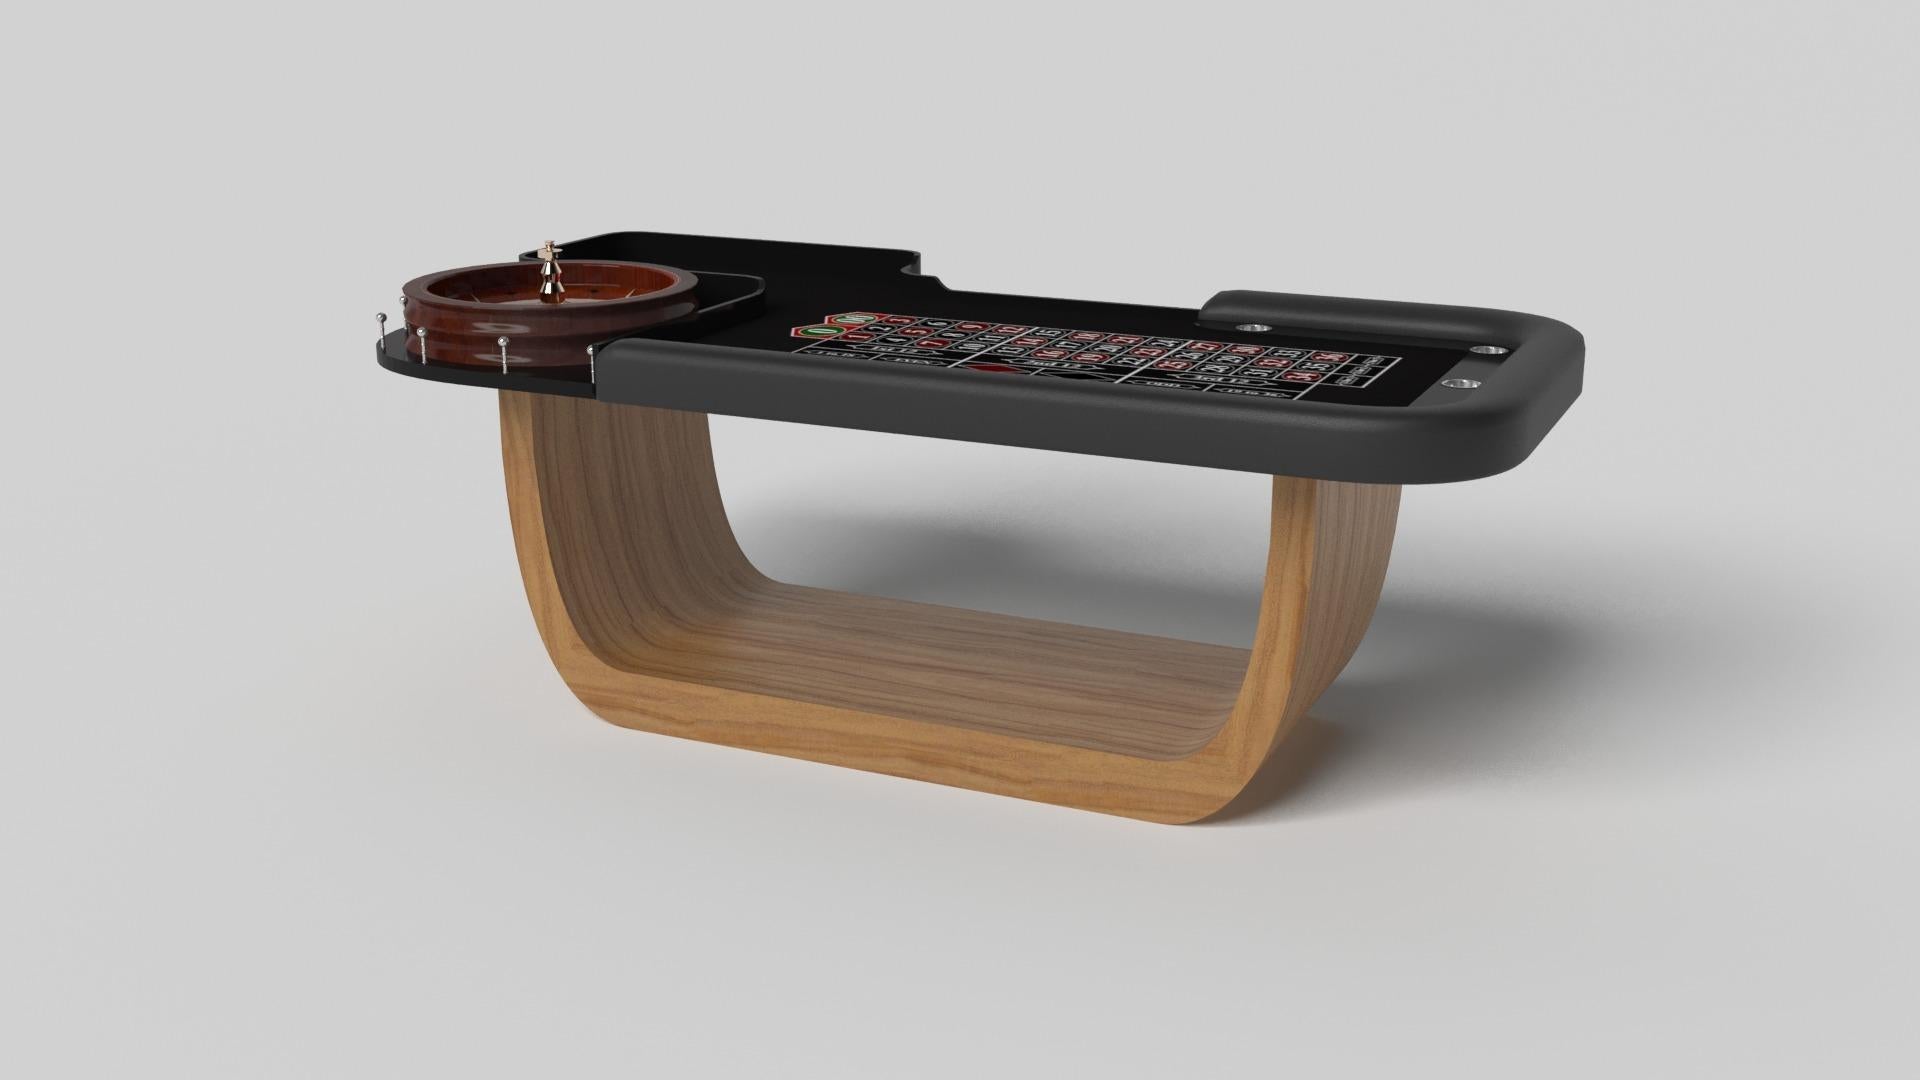 Handcrafted with intricate accents and a precision-carved curved base, the Sid roulette table in black encompasses a series of smooth edges, distinctive details, and unconventional elements in one unique expression of luxury design. Built by hand